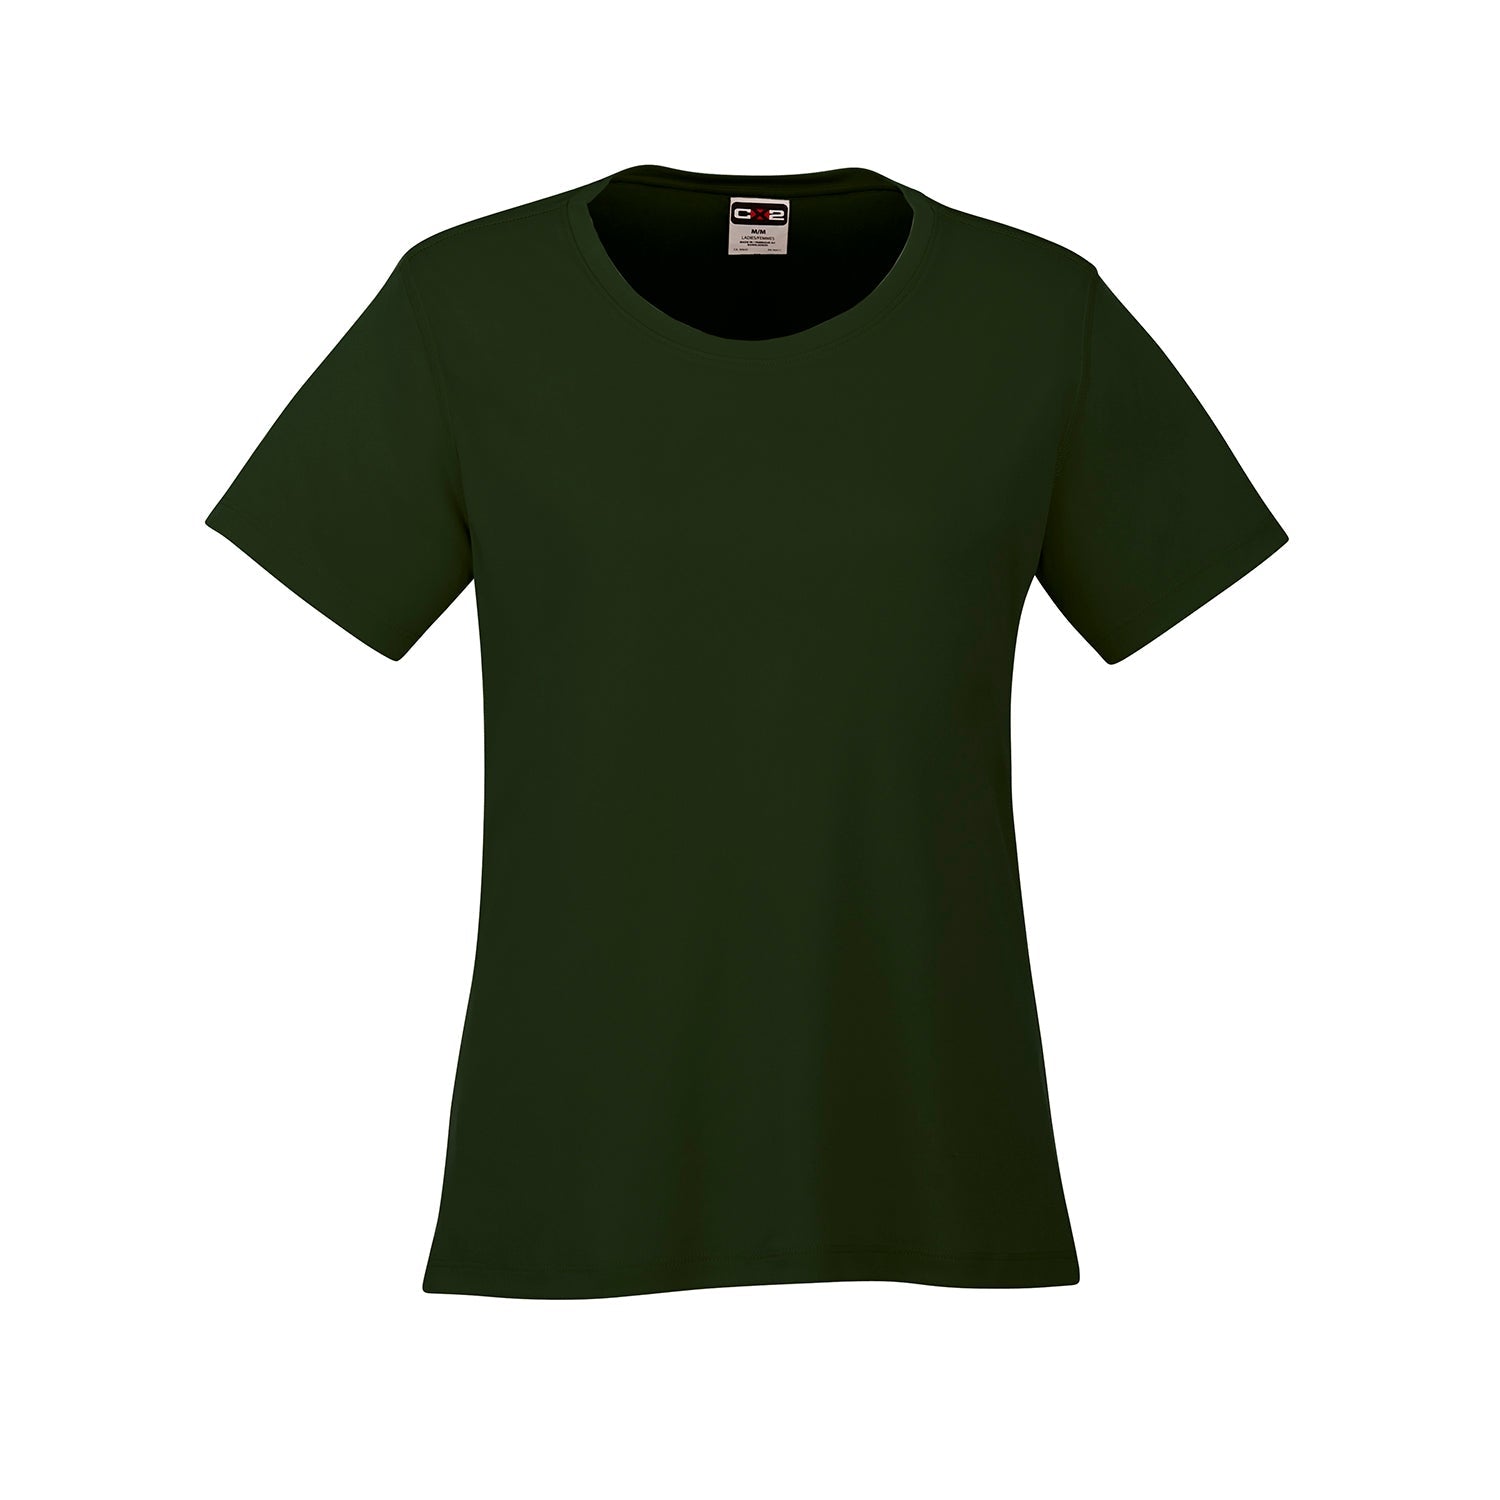 S05936 - Coast Ladies Crew Neck Polyester Tee Forest Green